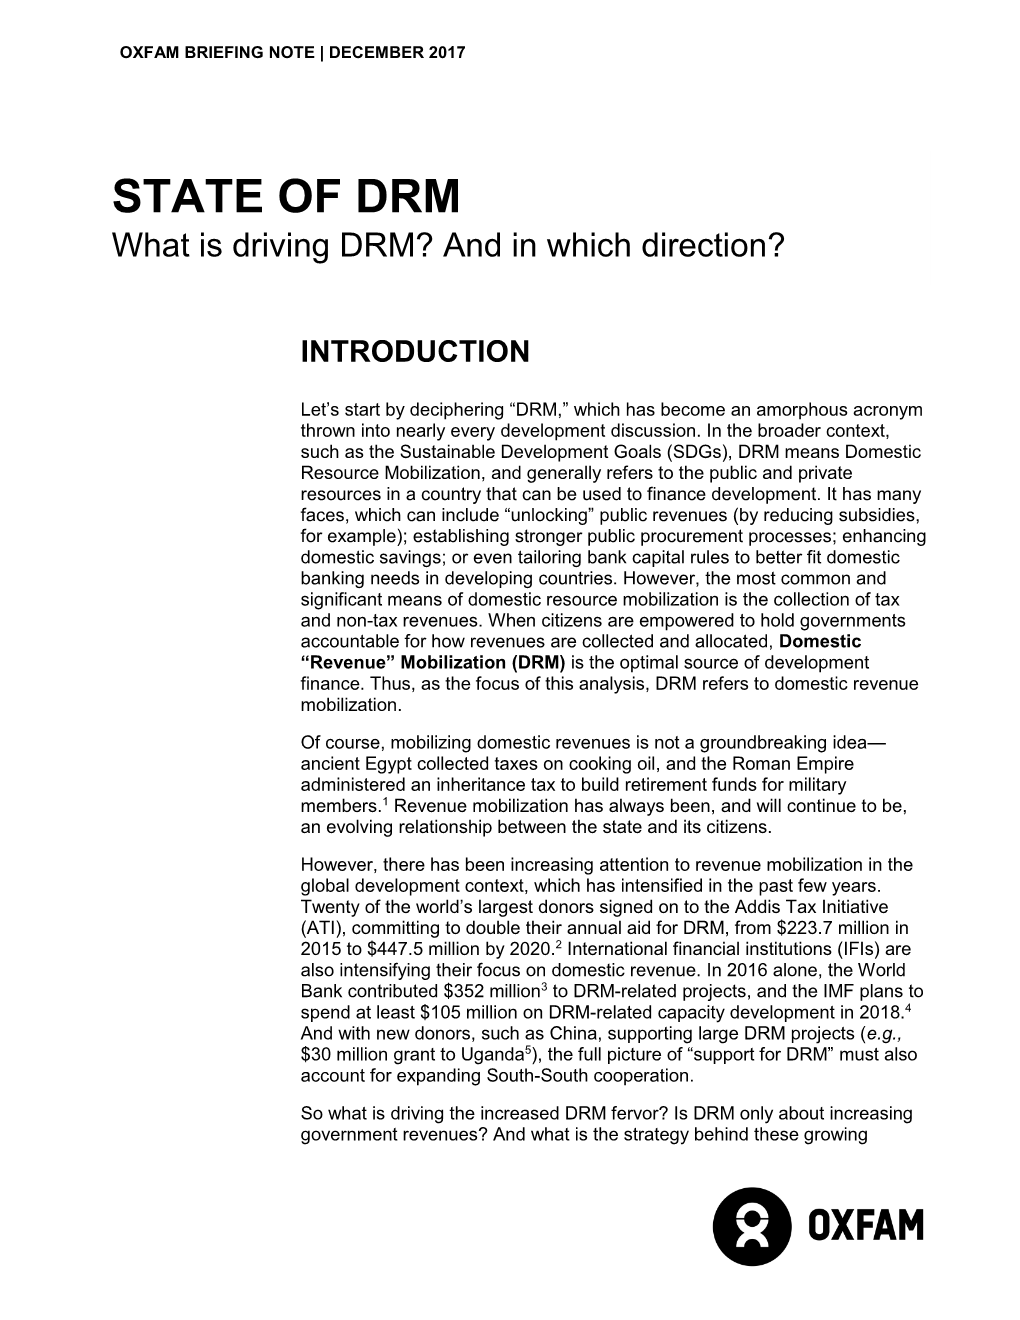 STATE of DRM What Is Driving DRM? and in Which Direction?